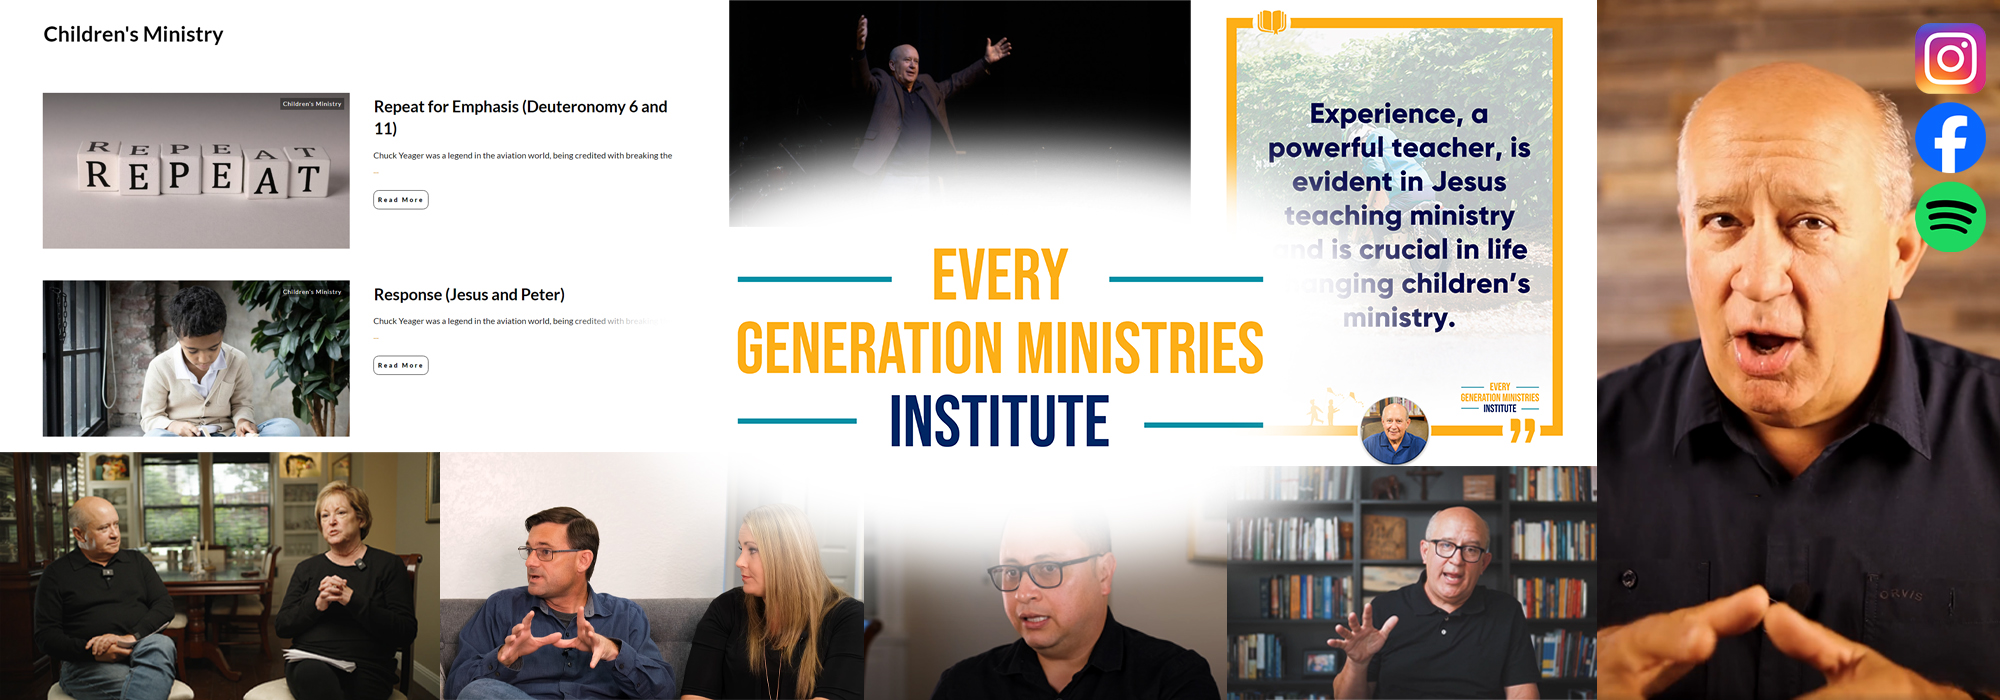 Every Generation Ministries Institute